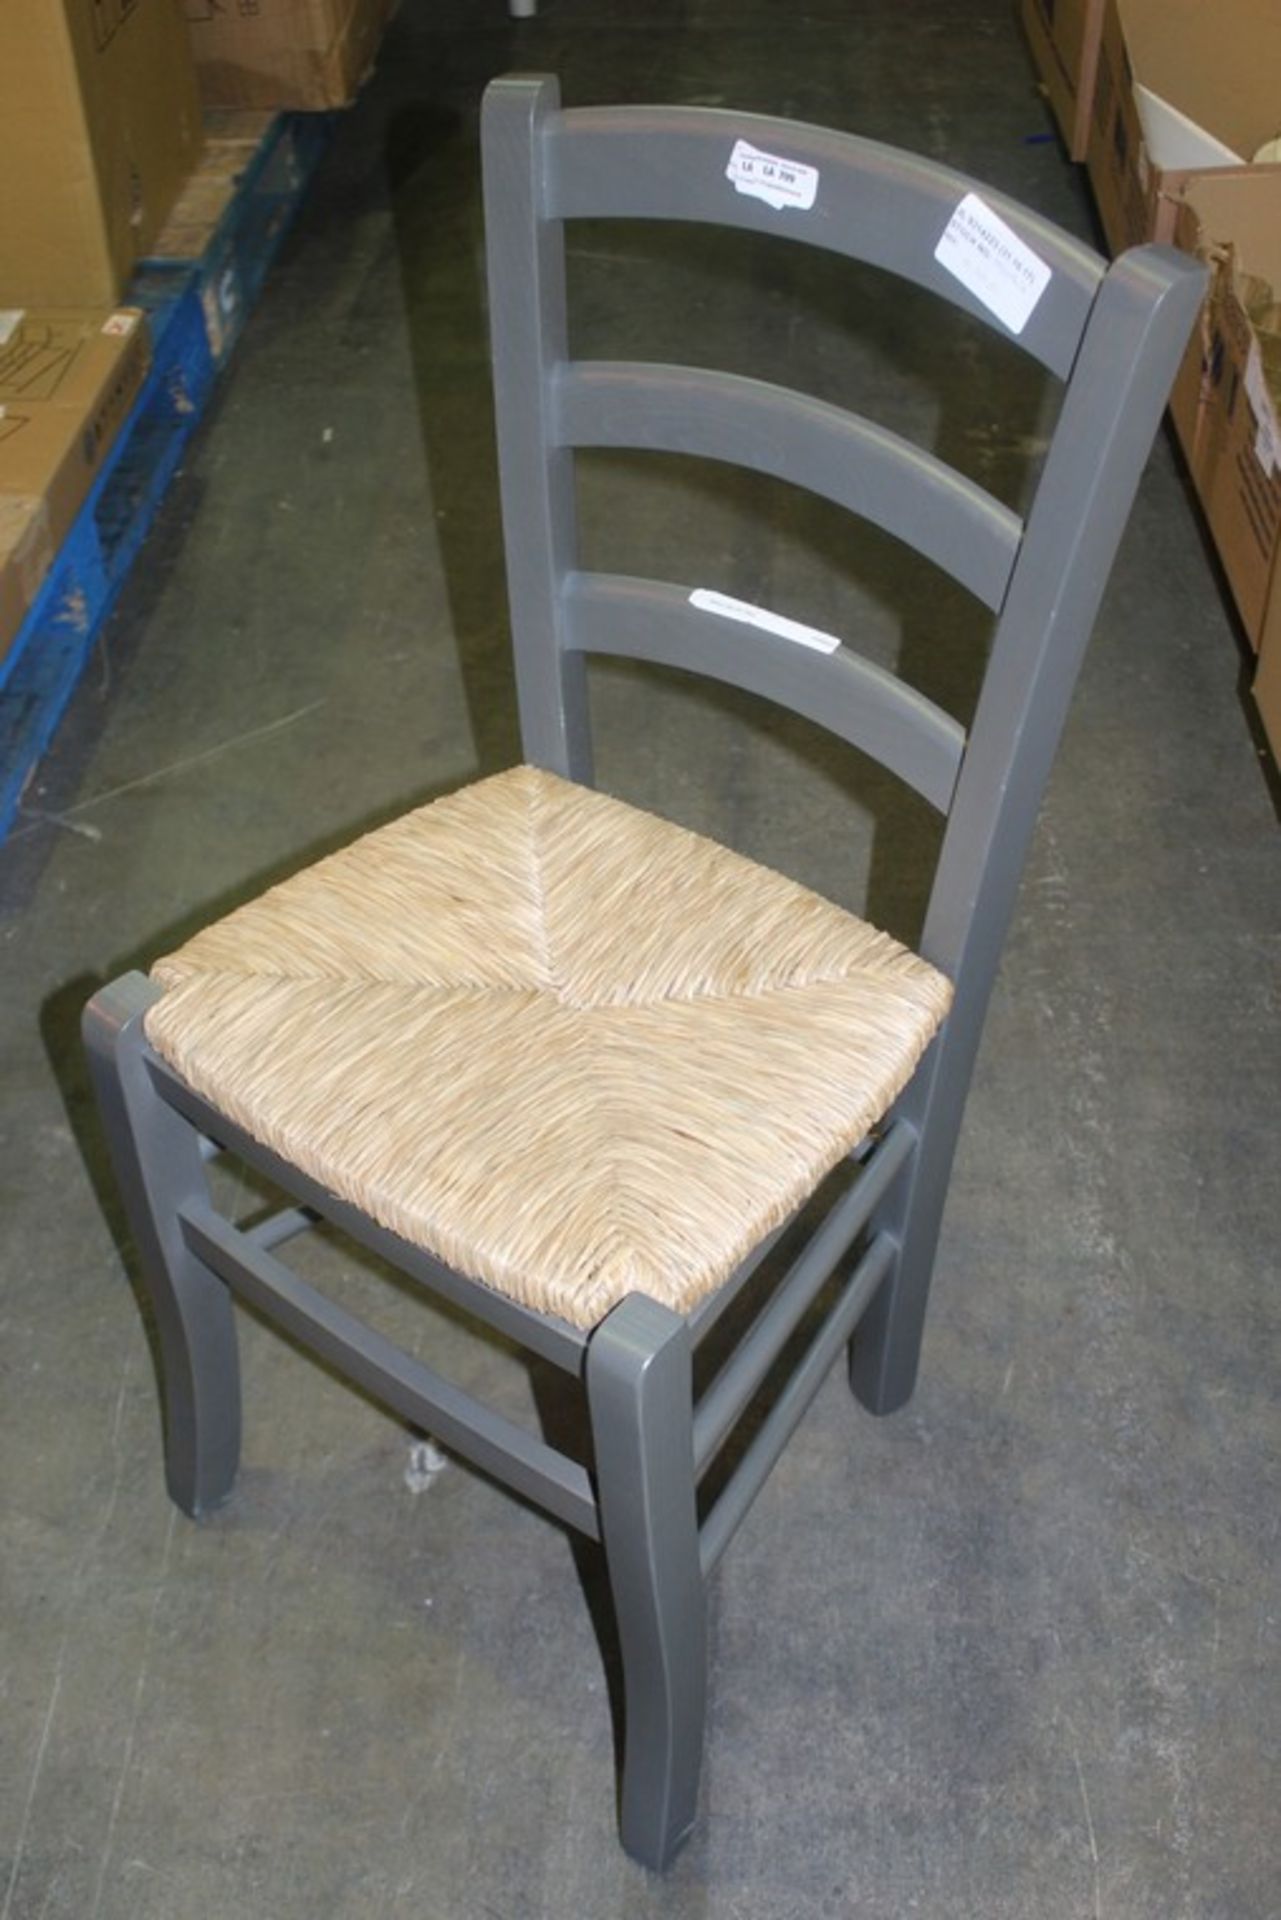 1 x TAVERN CHAIR IN DARK GREY RRP £20 (31/10/17) *PLEASE NOTE THAT THE BID PRICE IS MULTIPLIED BY